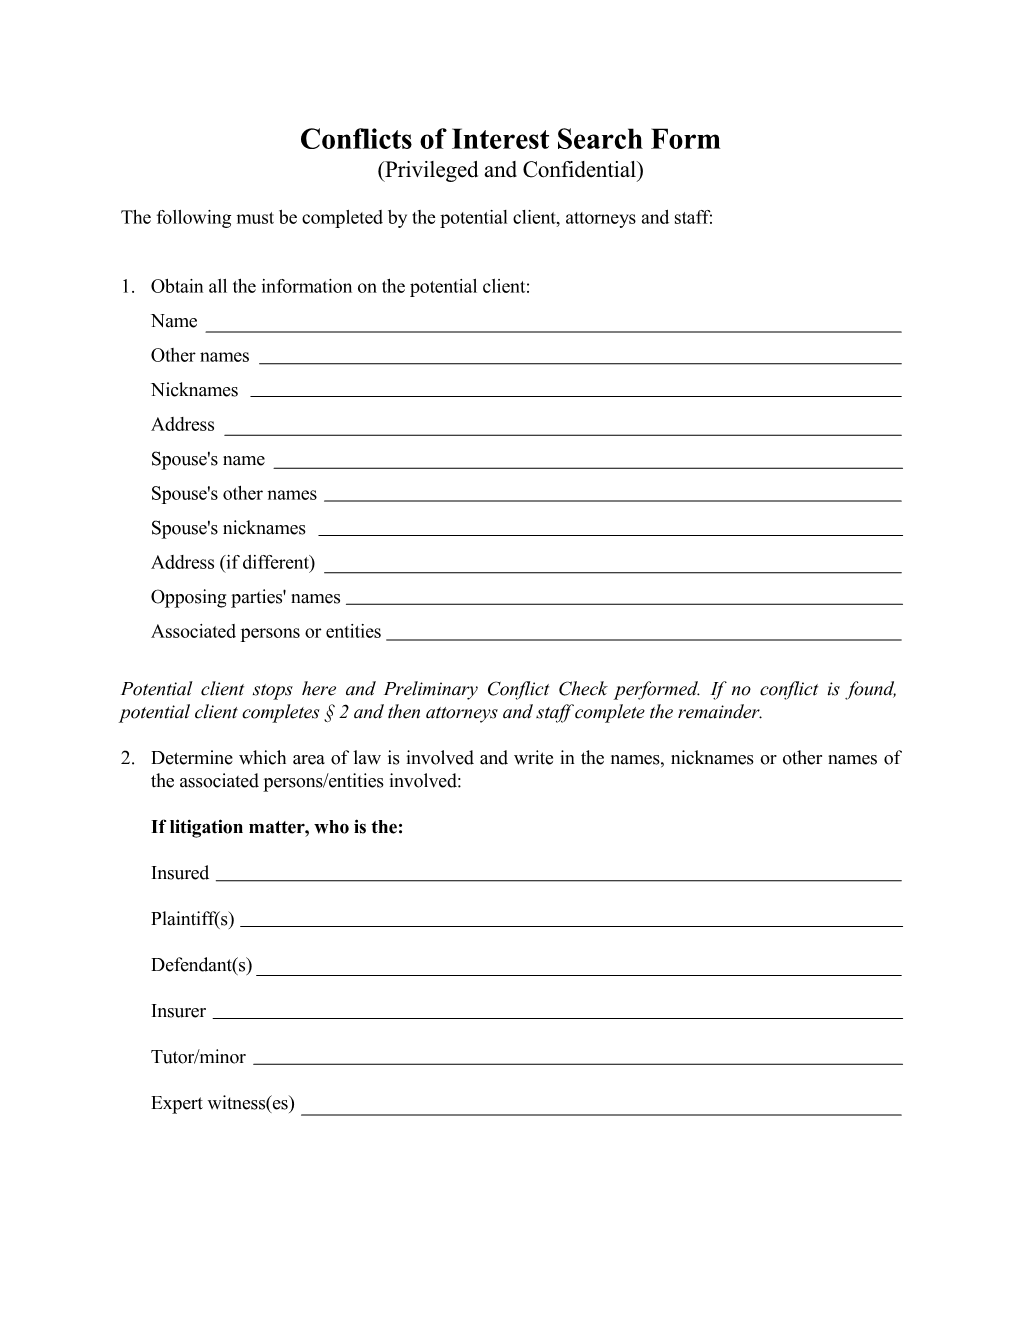 Conflicts of Interest Search Form